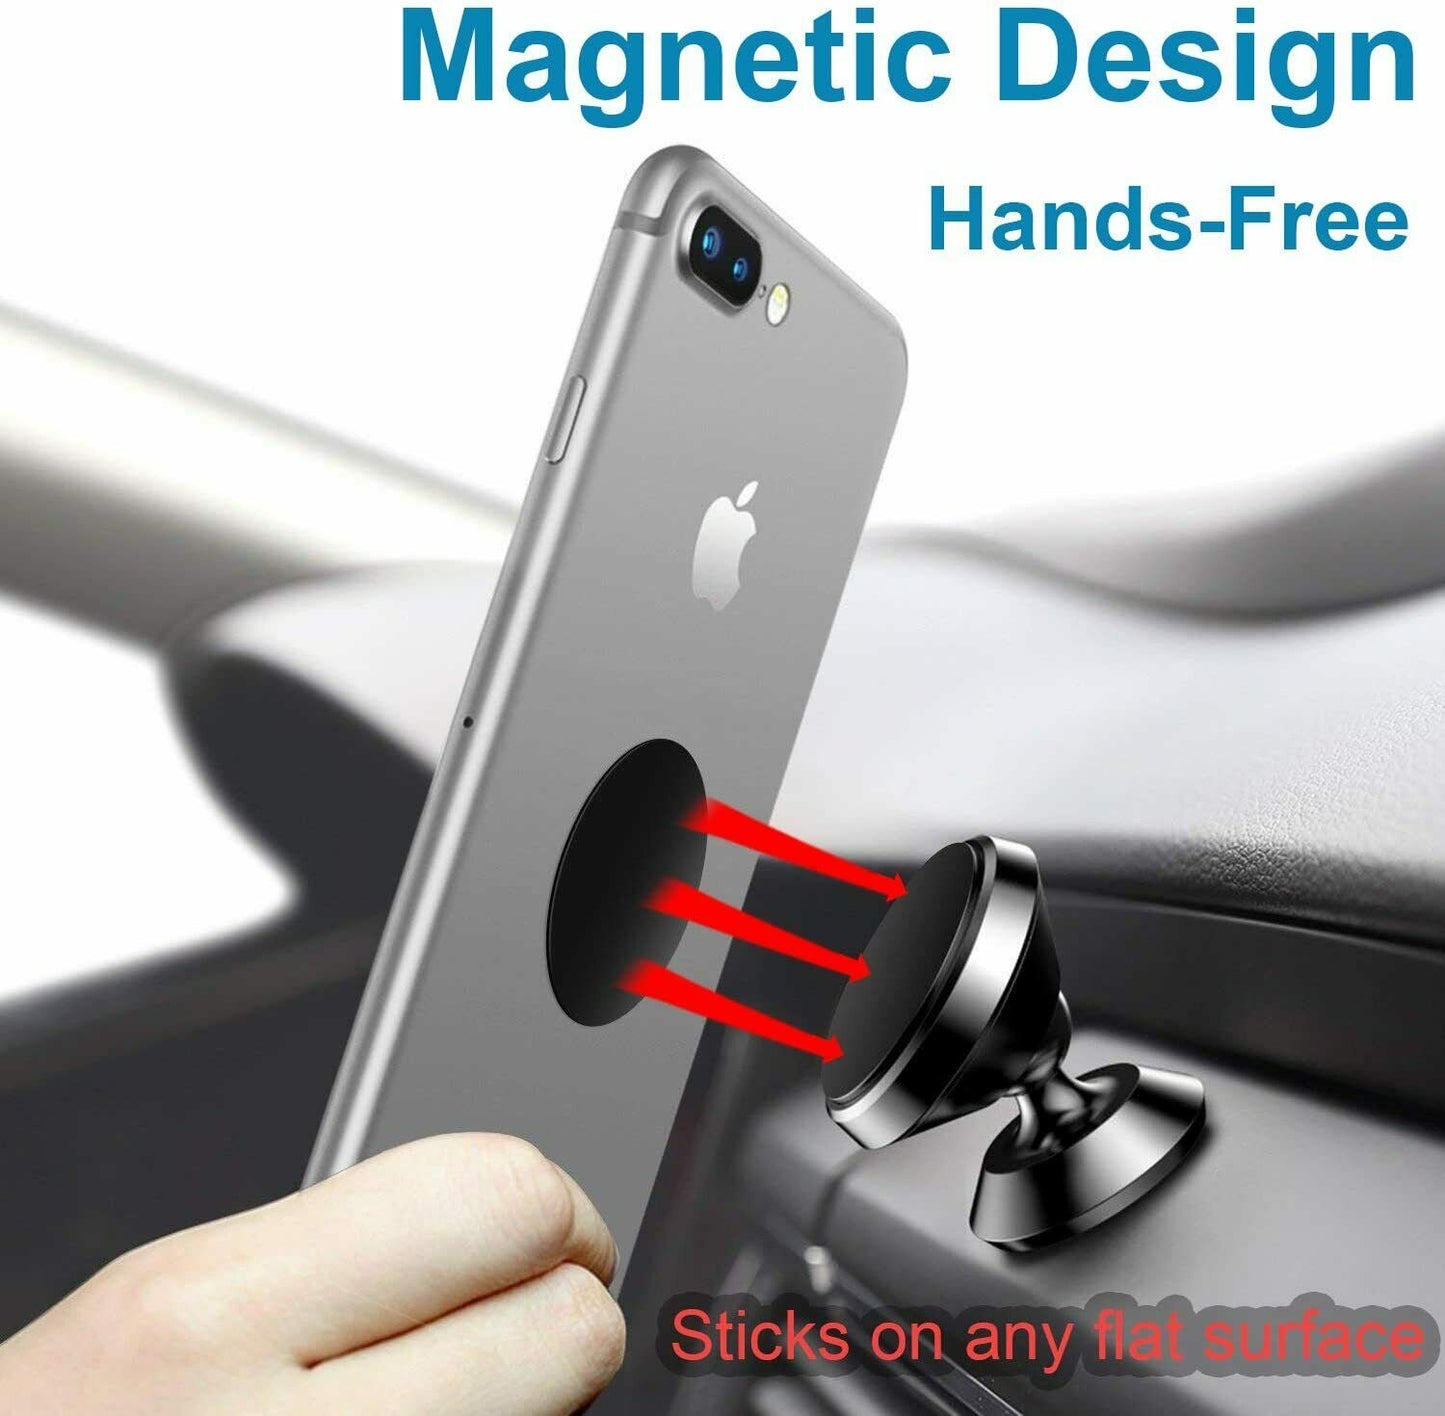 2 Pack Magnetic Car Mount Car Phone Holder Stand Dashboard For iPhone Android Samsung